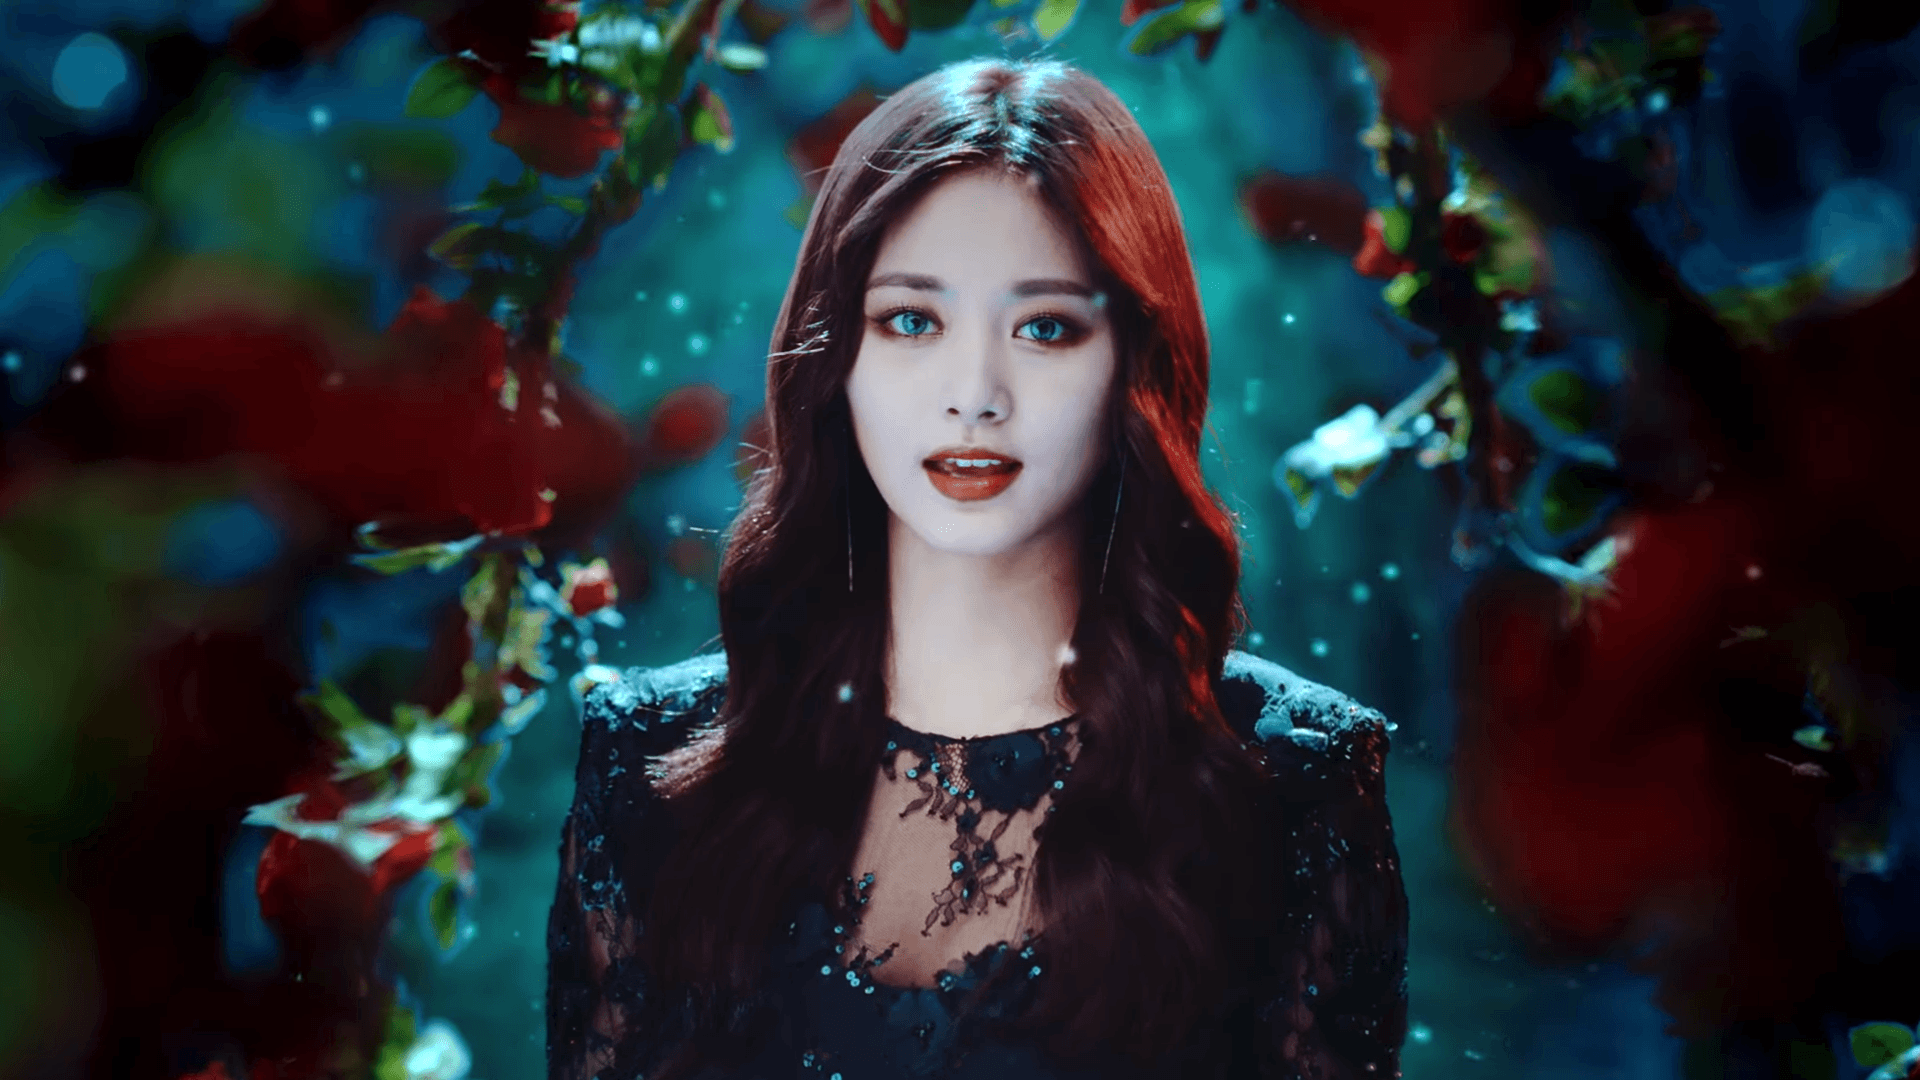 Tzuyu from MV brightened up for wallpaper 1080p